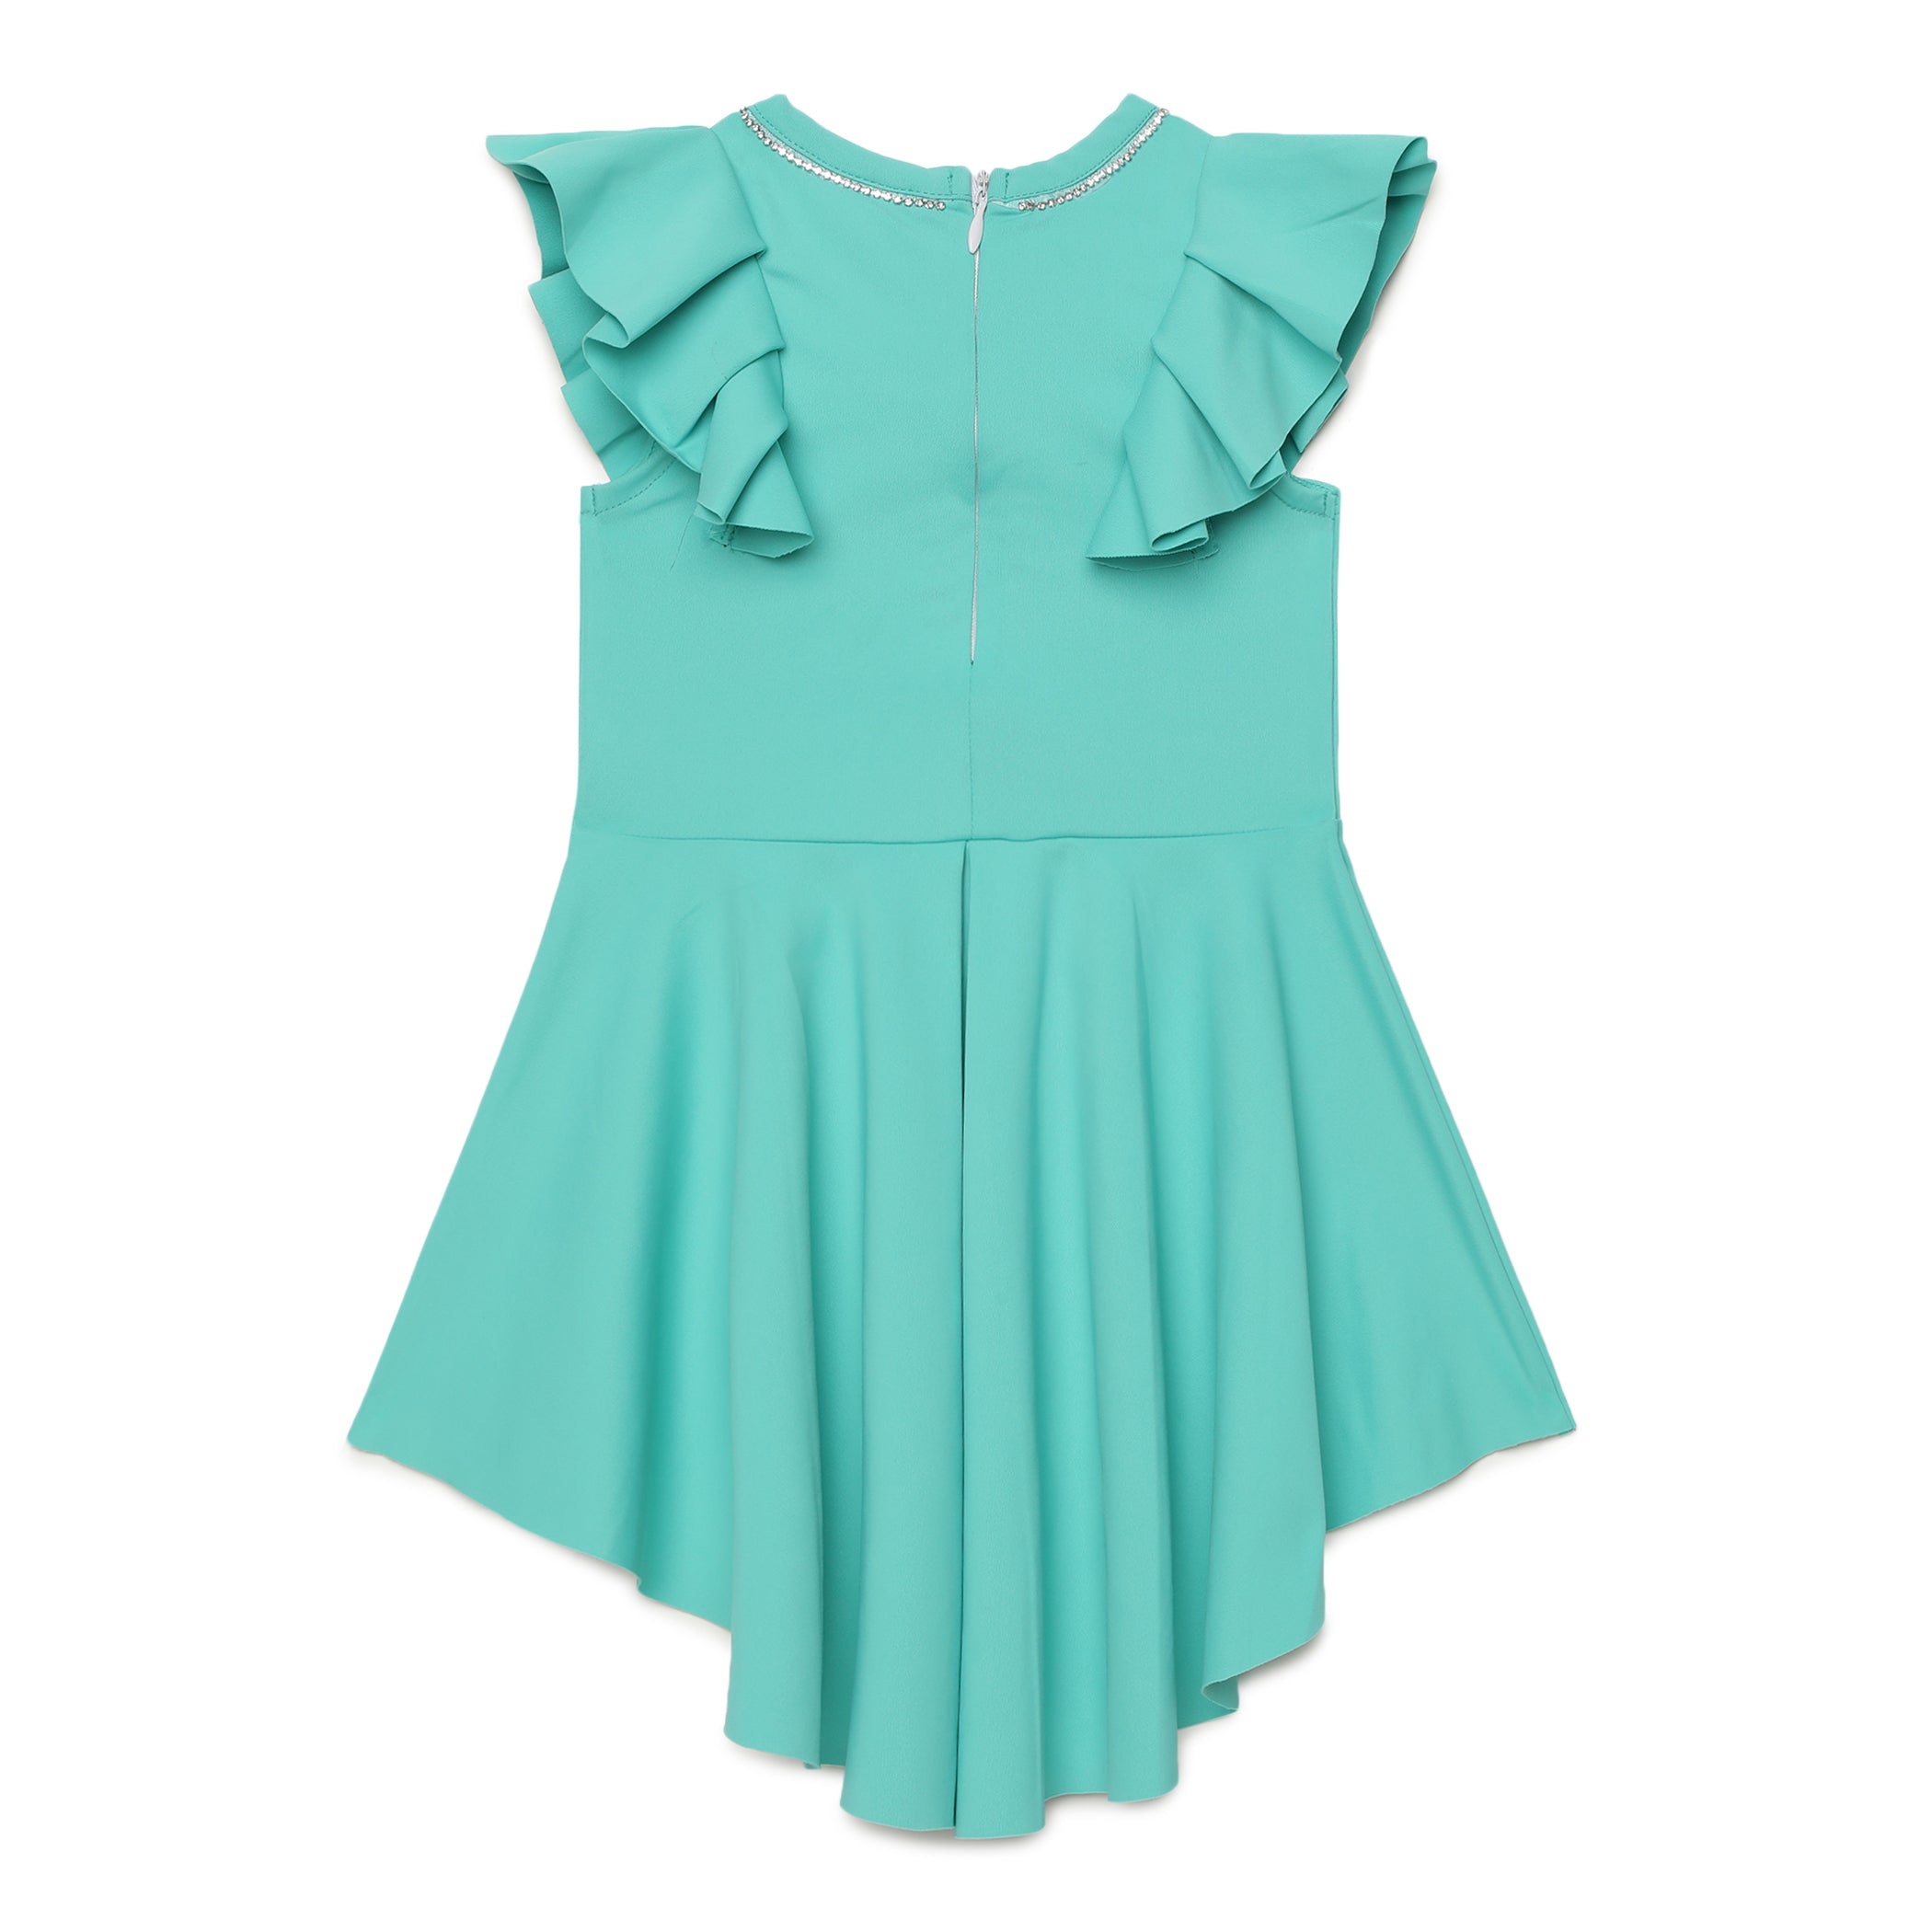 Girls Solid Exclusive Dress